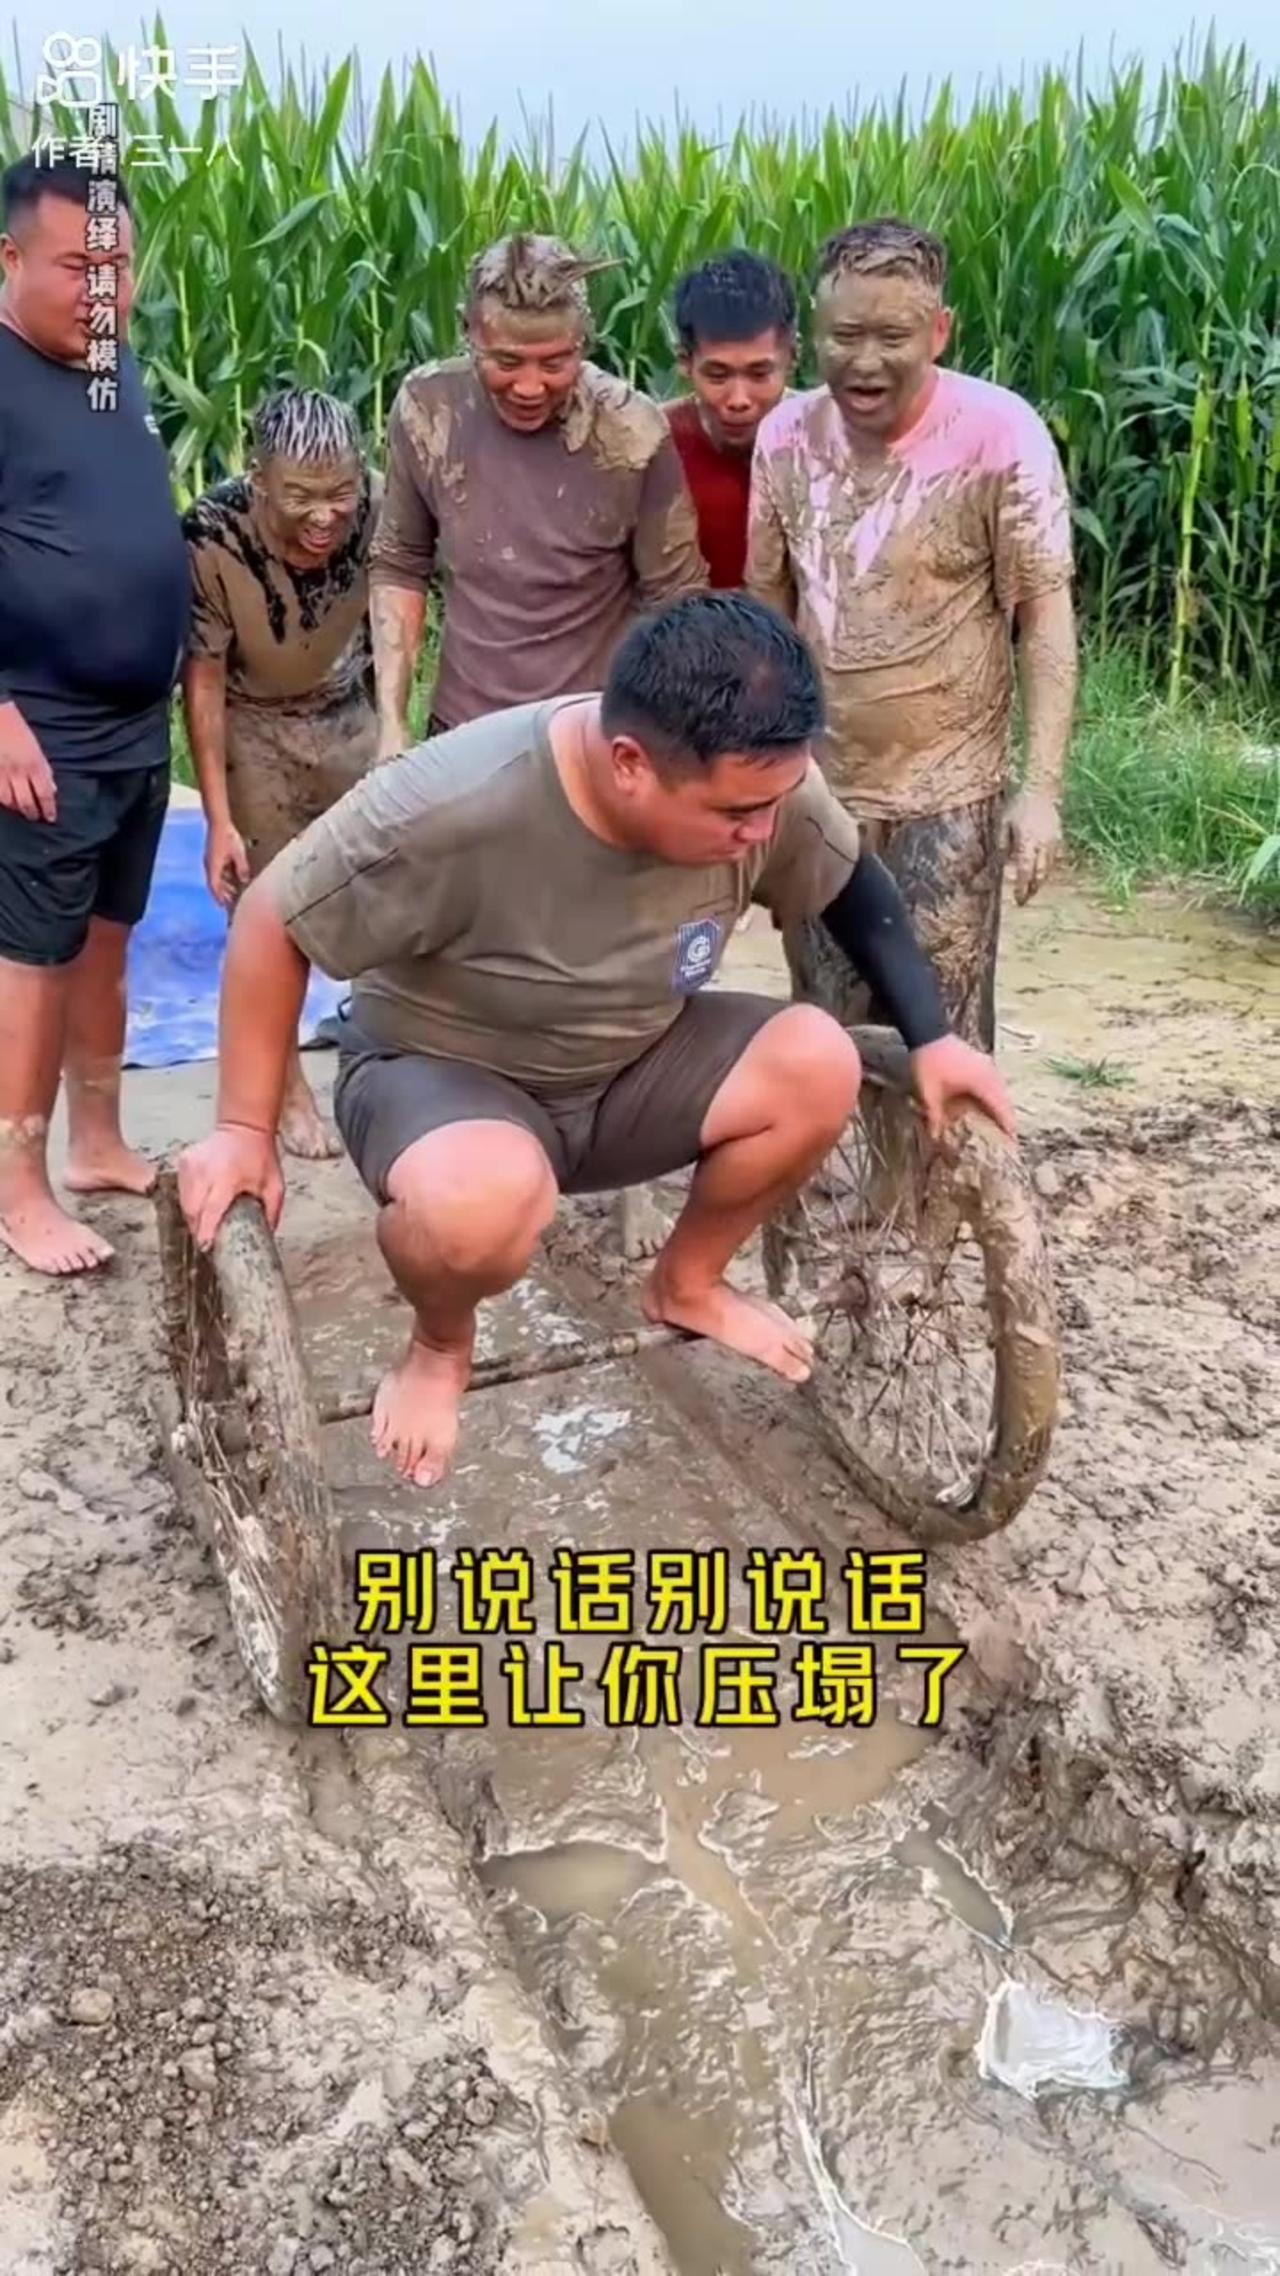 The funnest game of Chinese comedy videos must watch